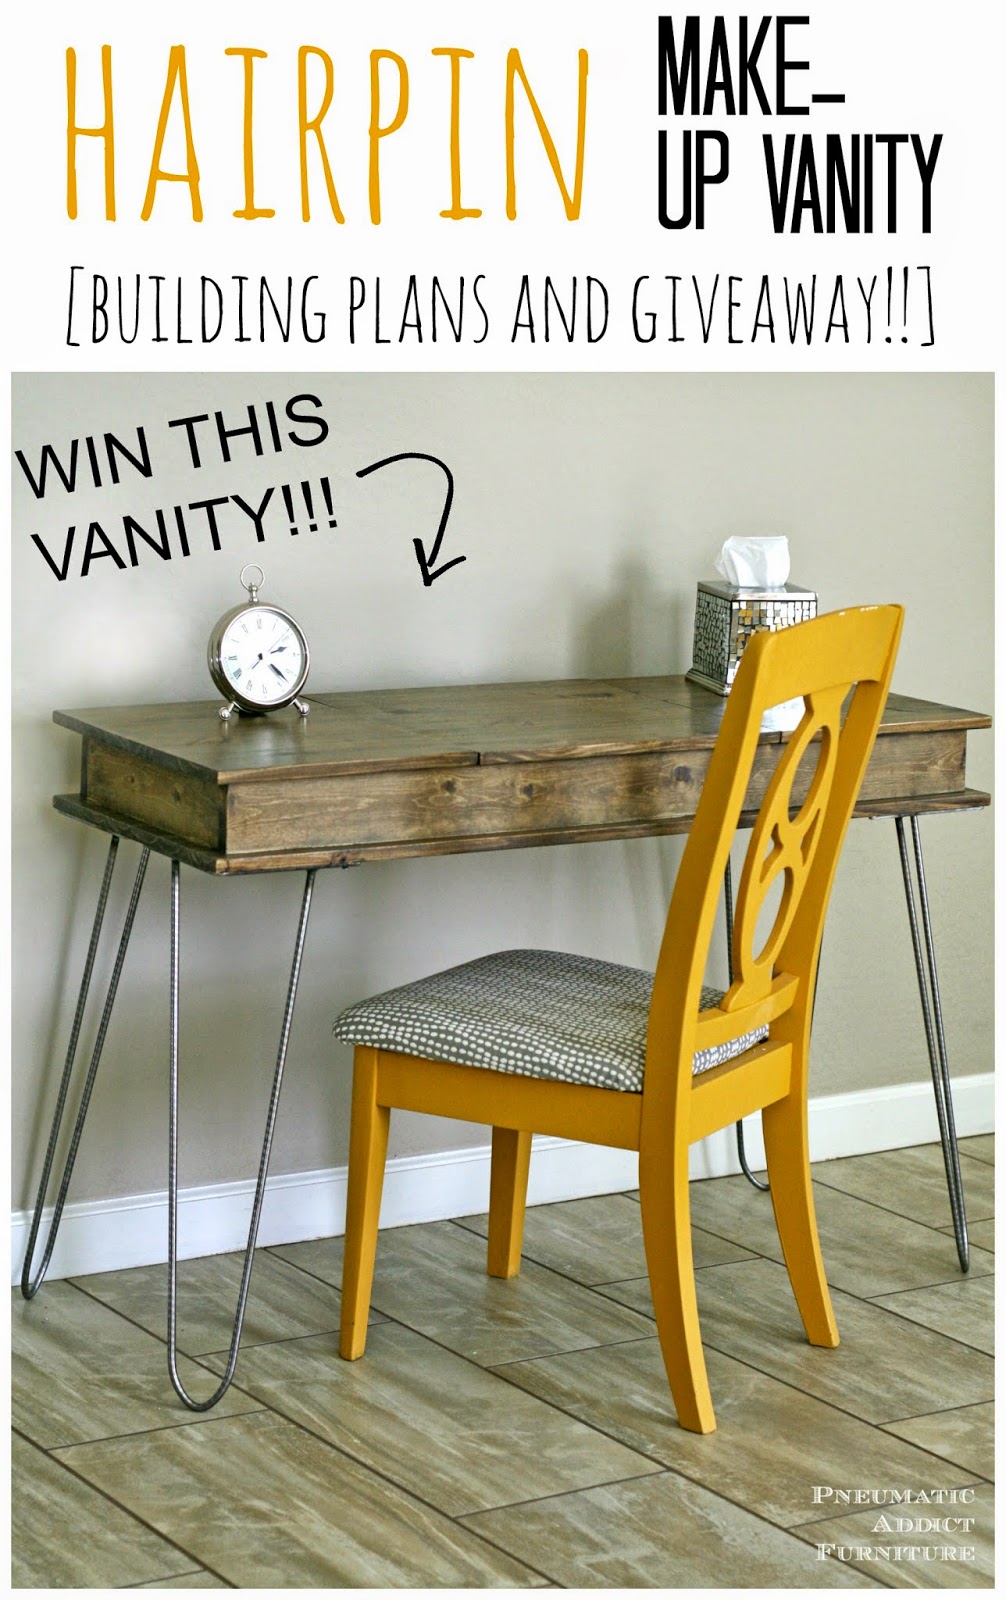 DIY Hairpin leg, make-up vanity. Free building plans and giveaway!